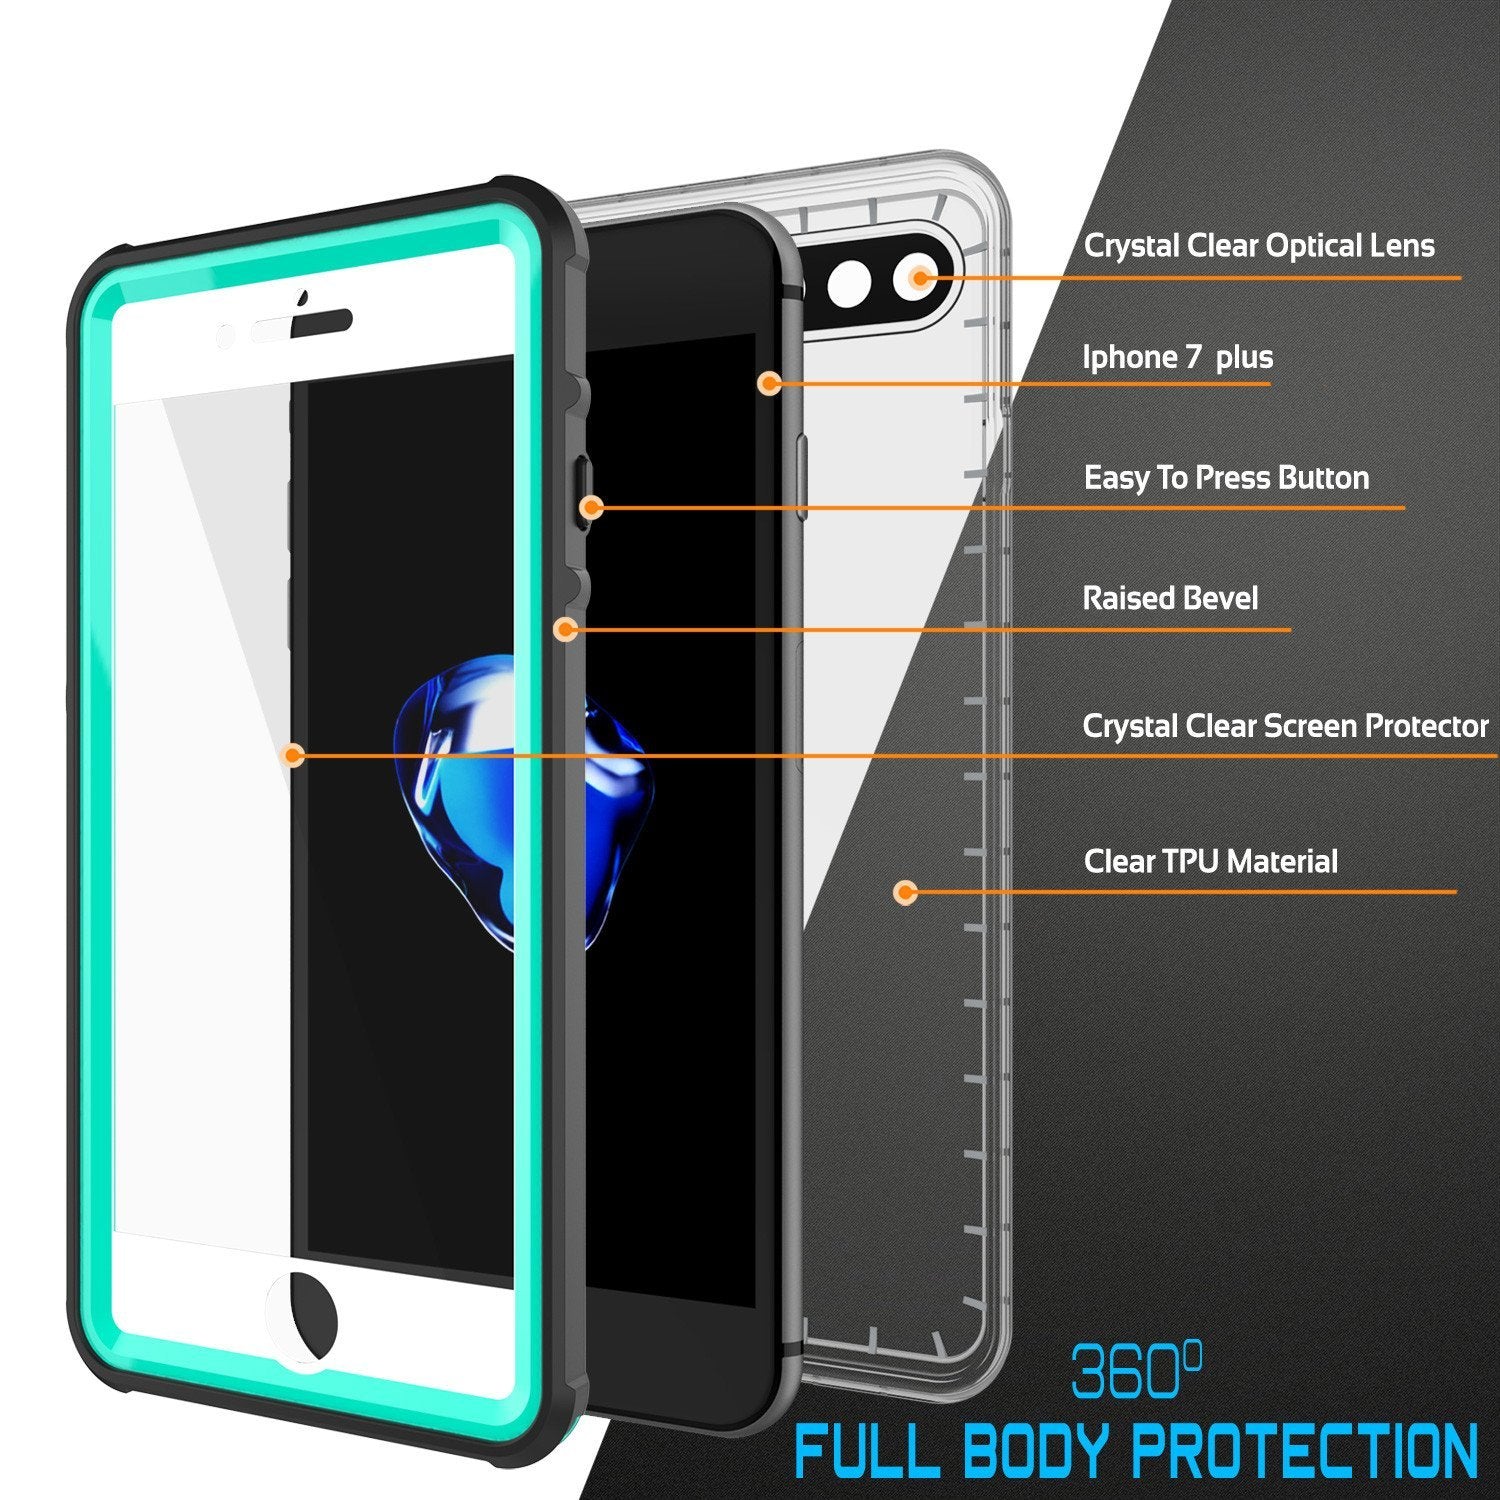 iPhone 8+ Plus Waterproof Case, PUNKcase CRYSTAL Teal W/ Attached Screen Protector  | Warranty